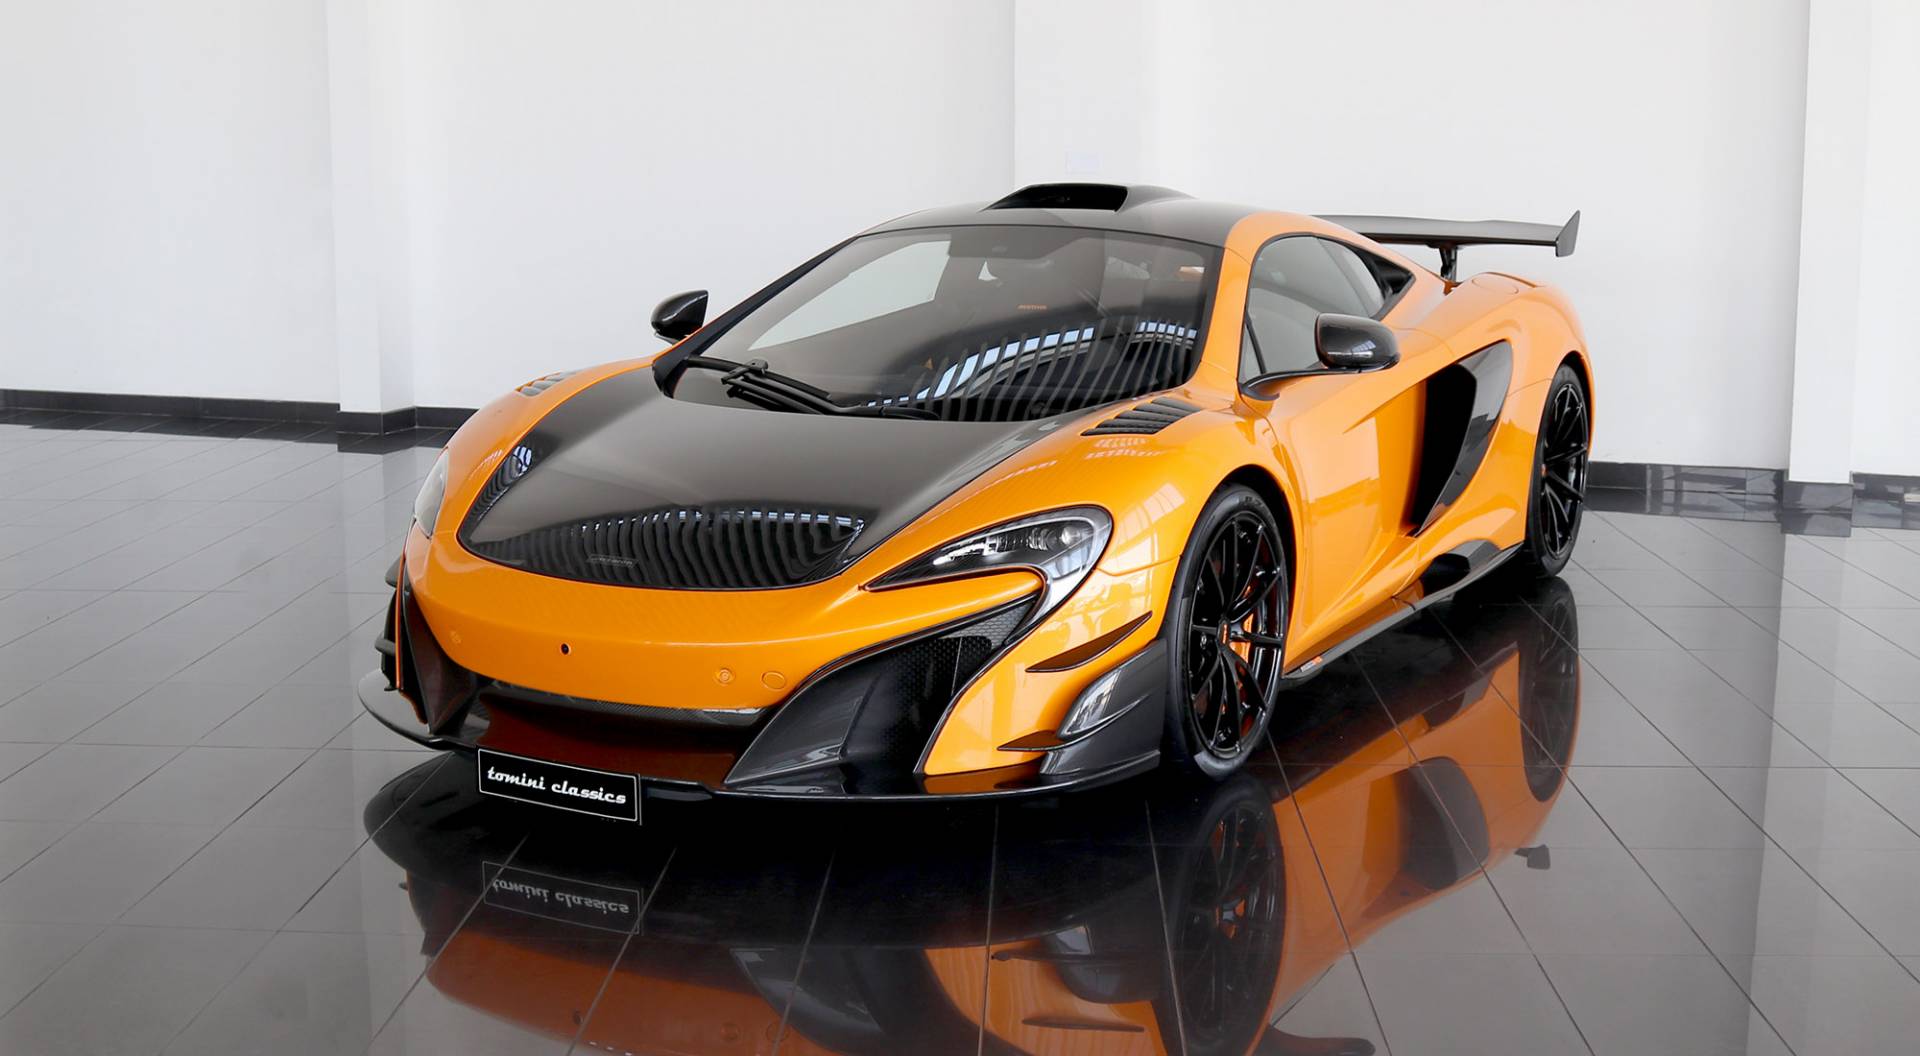 for-sale-mclaren-688-hs-mso-2016-offered-for-gbp-428-128